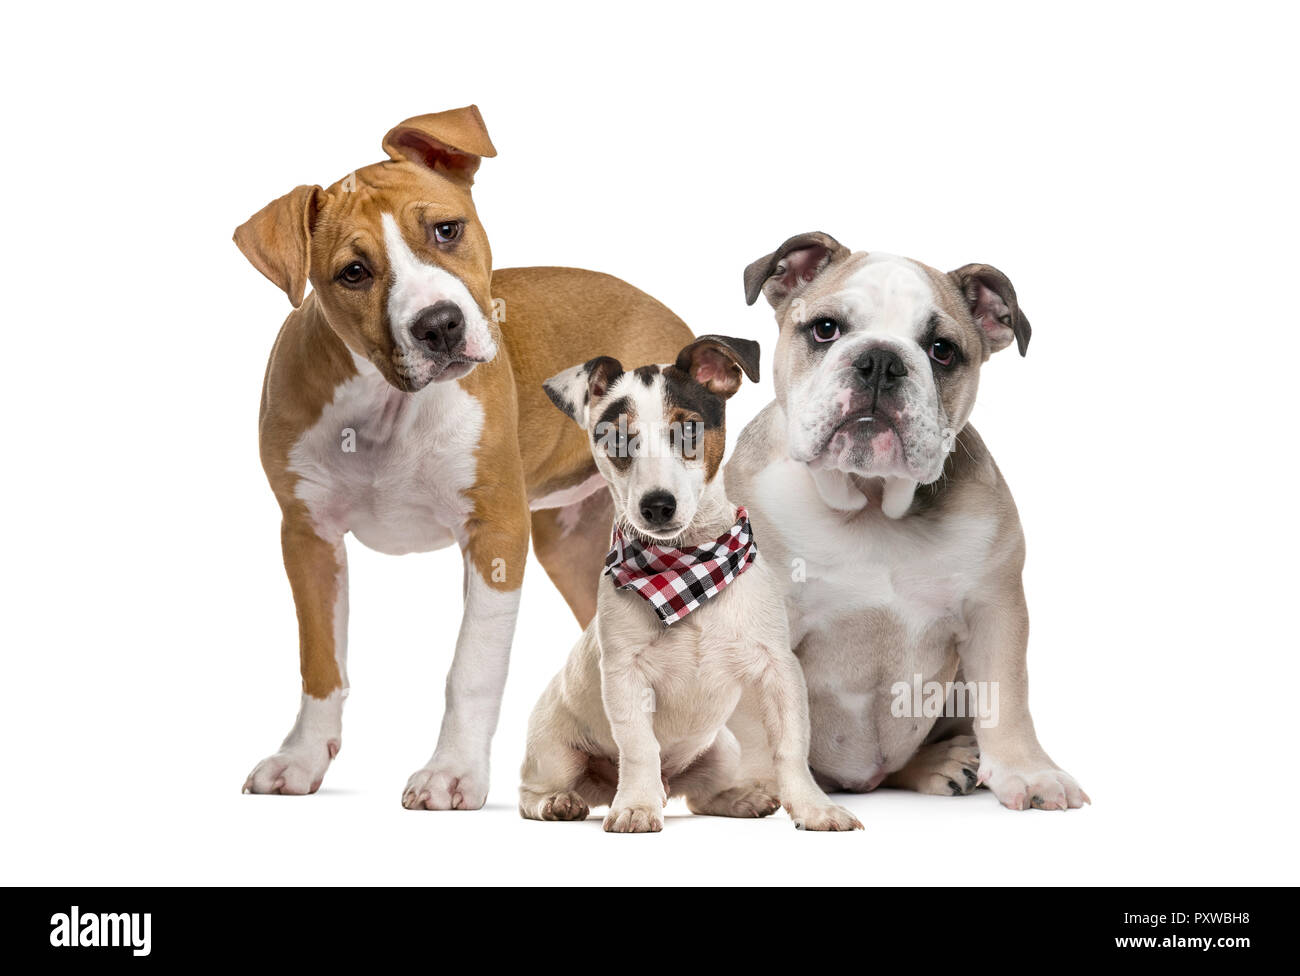 American Staffordshire Terrier, chiot Bulldog Anglais chiot Jack Russell Terrier puppy vérifié avec écharpe, in front of white background Banque D'Images